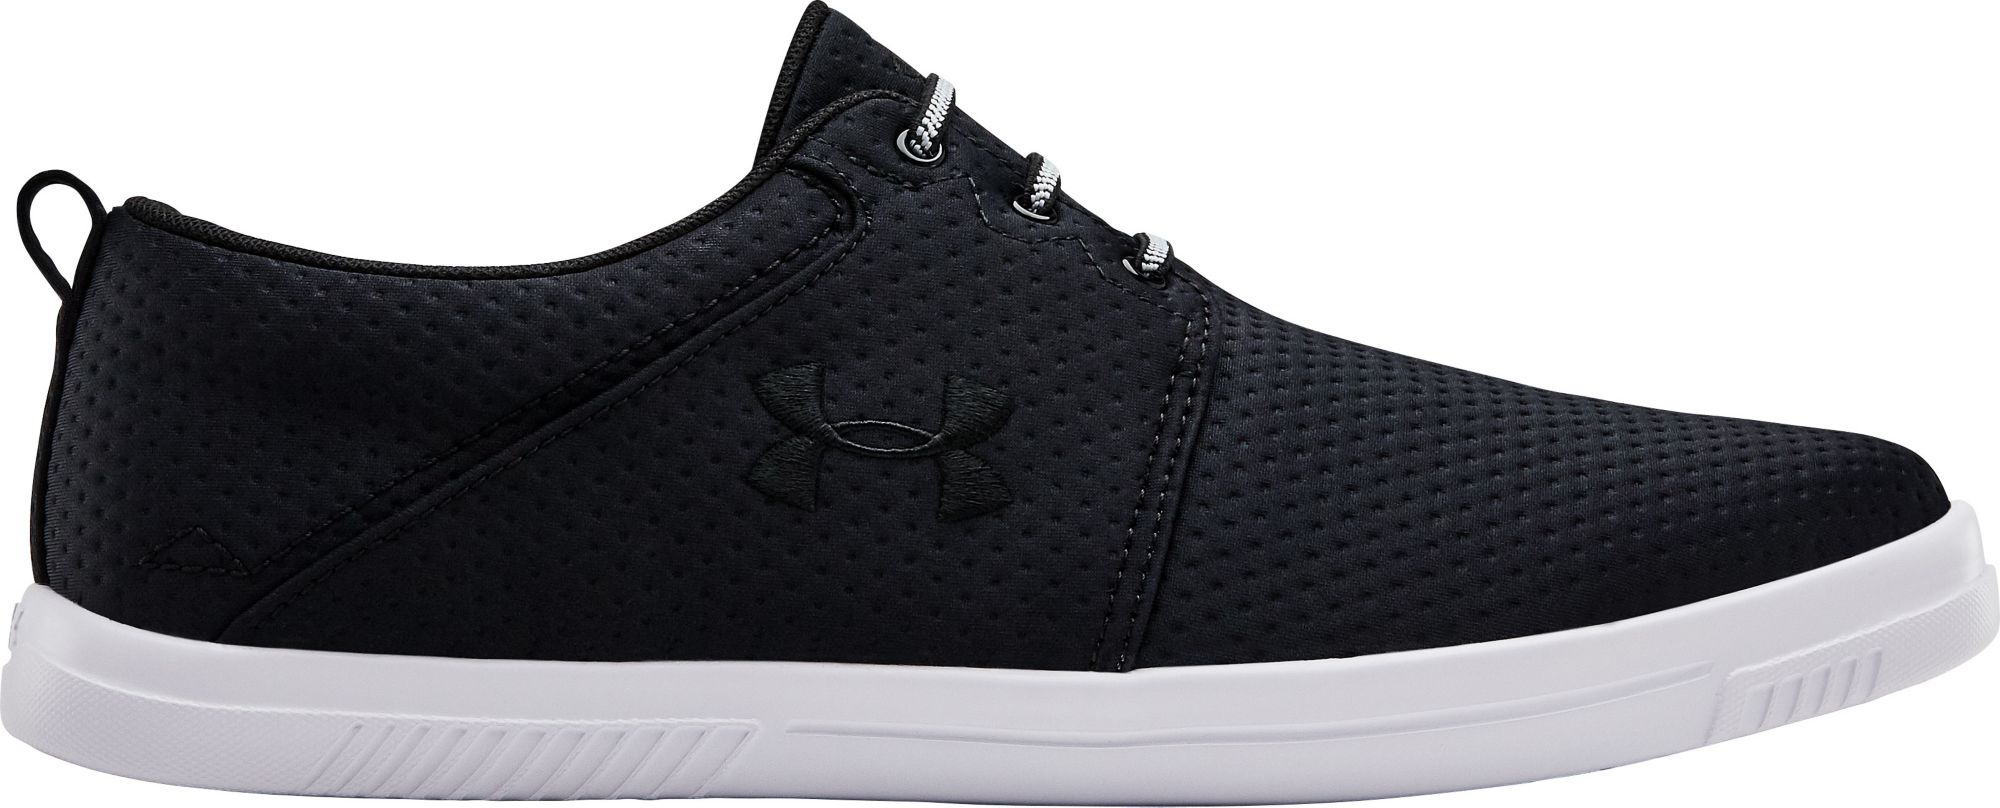 under armour shoes street encounter